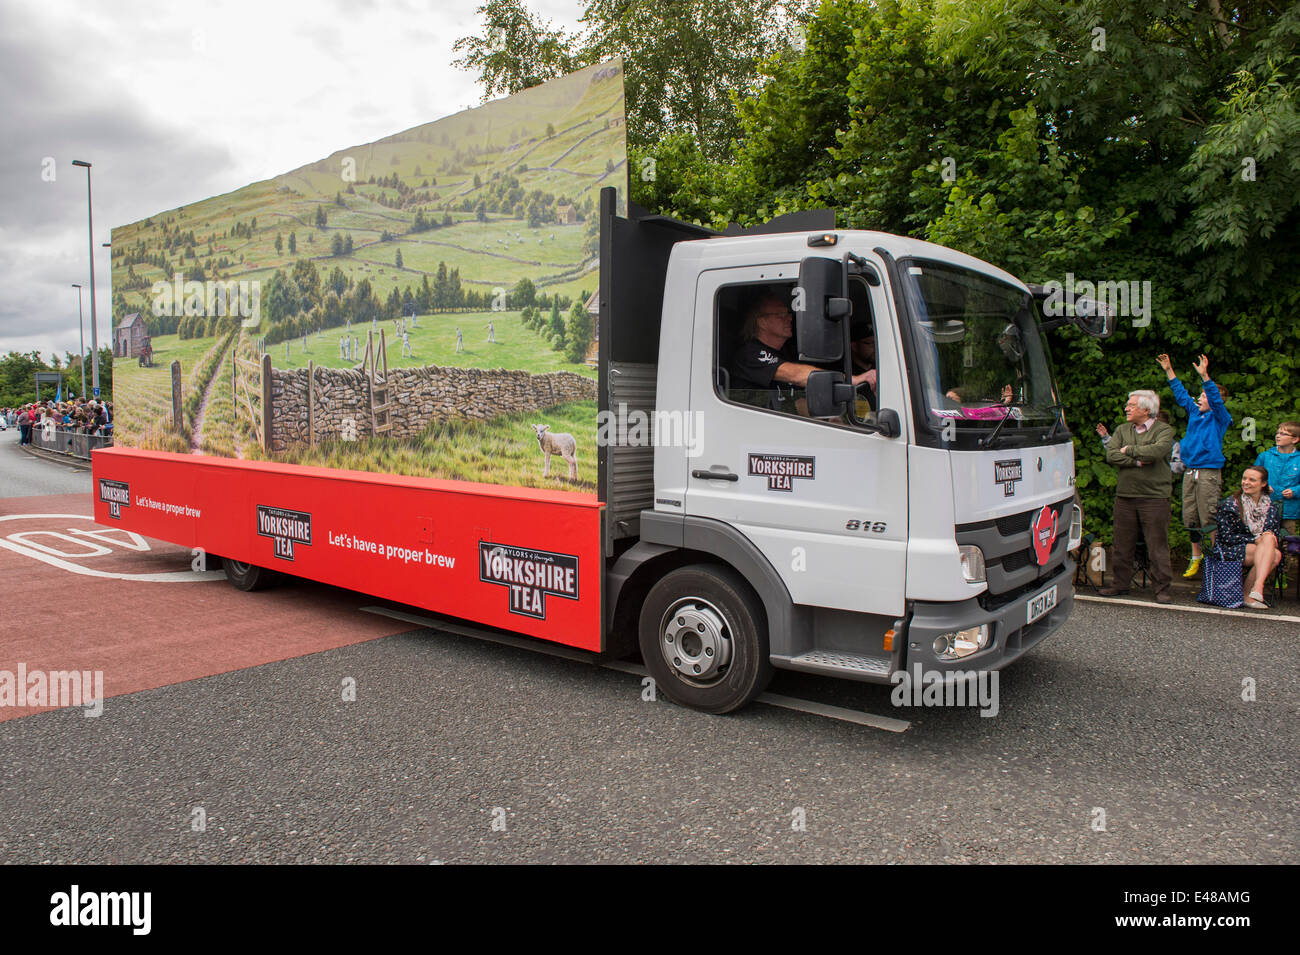 Burley-In-Wharfedale, Yorkshire, July 5th 2014. The Yorkshire Tea float lorry (vehicle in promotional caravan) drives past happy, excited faces of crowds of people lining the route of the Tour De France. Credit:  Ian Lamond/Alamy Live News Stock Photo